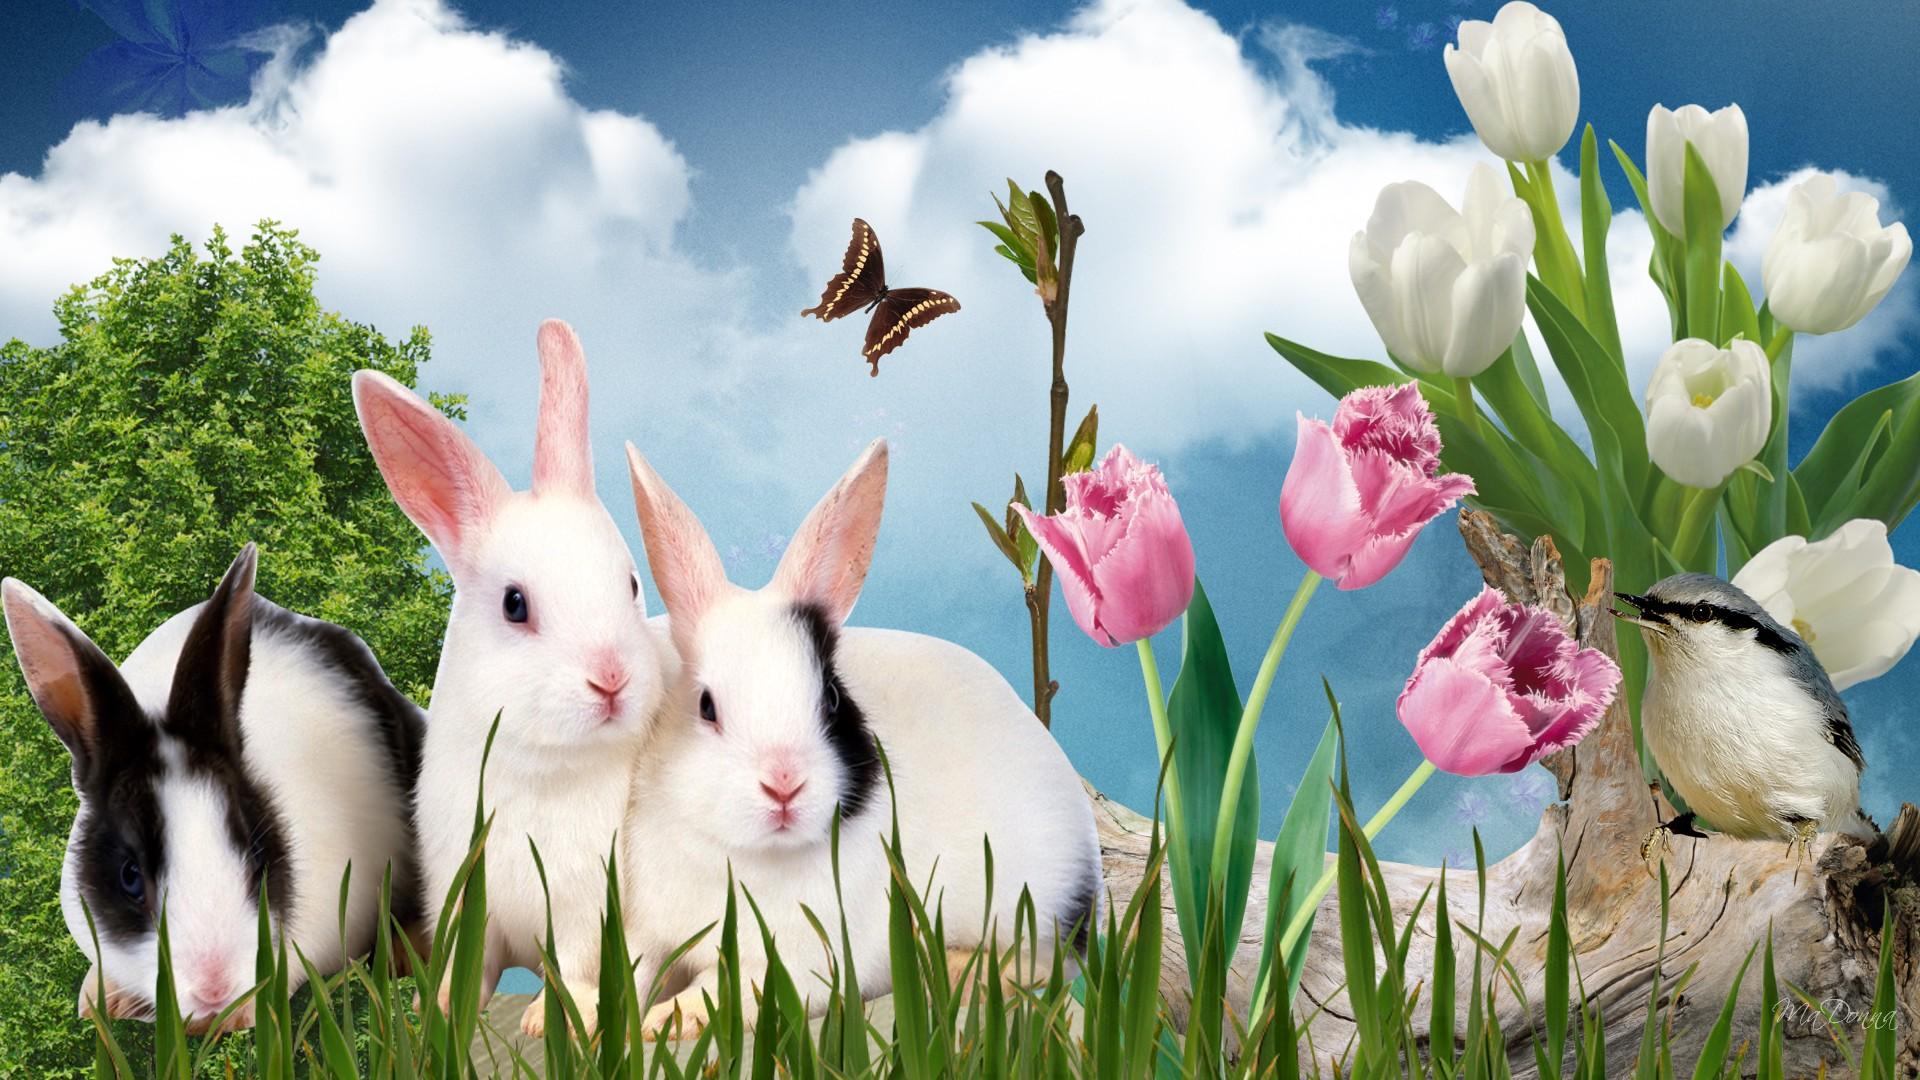 Spring Bunnies wallpaper. nature and landscape